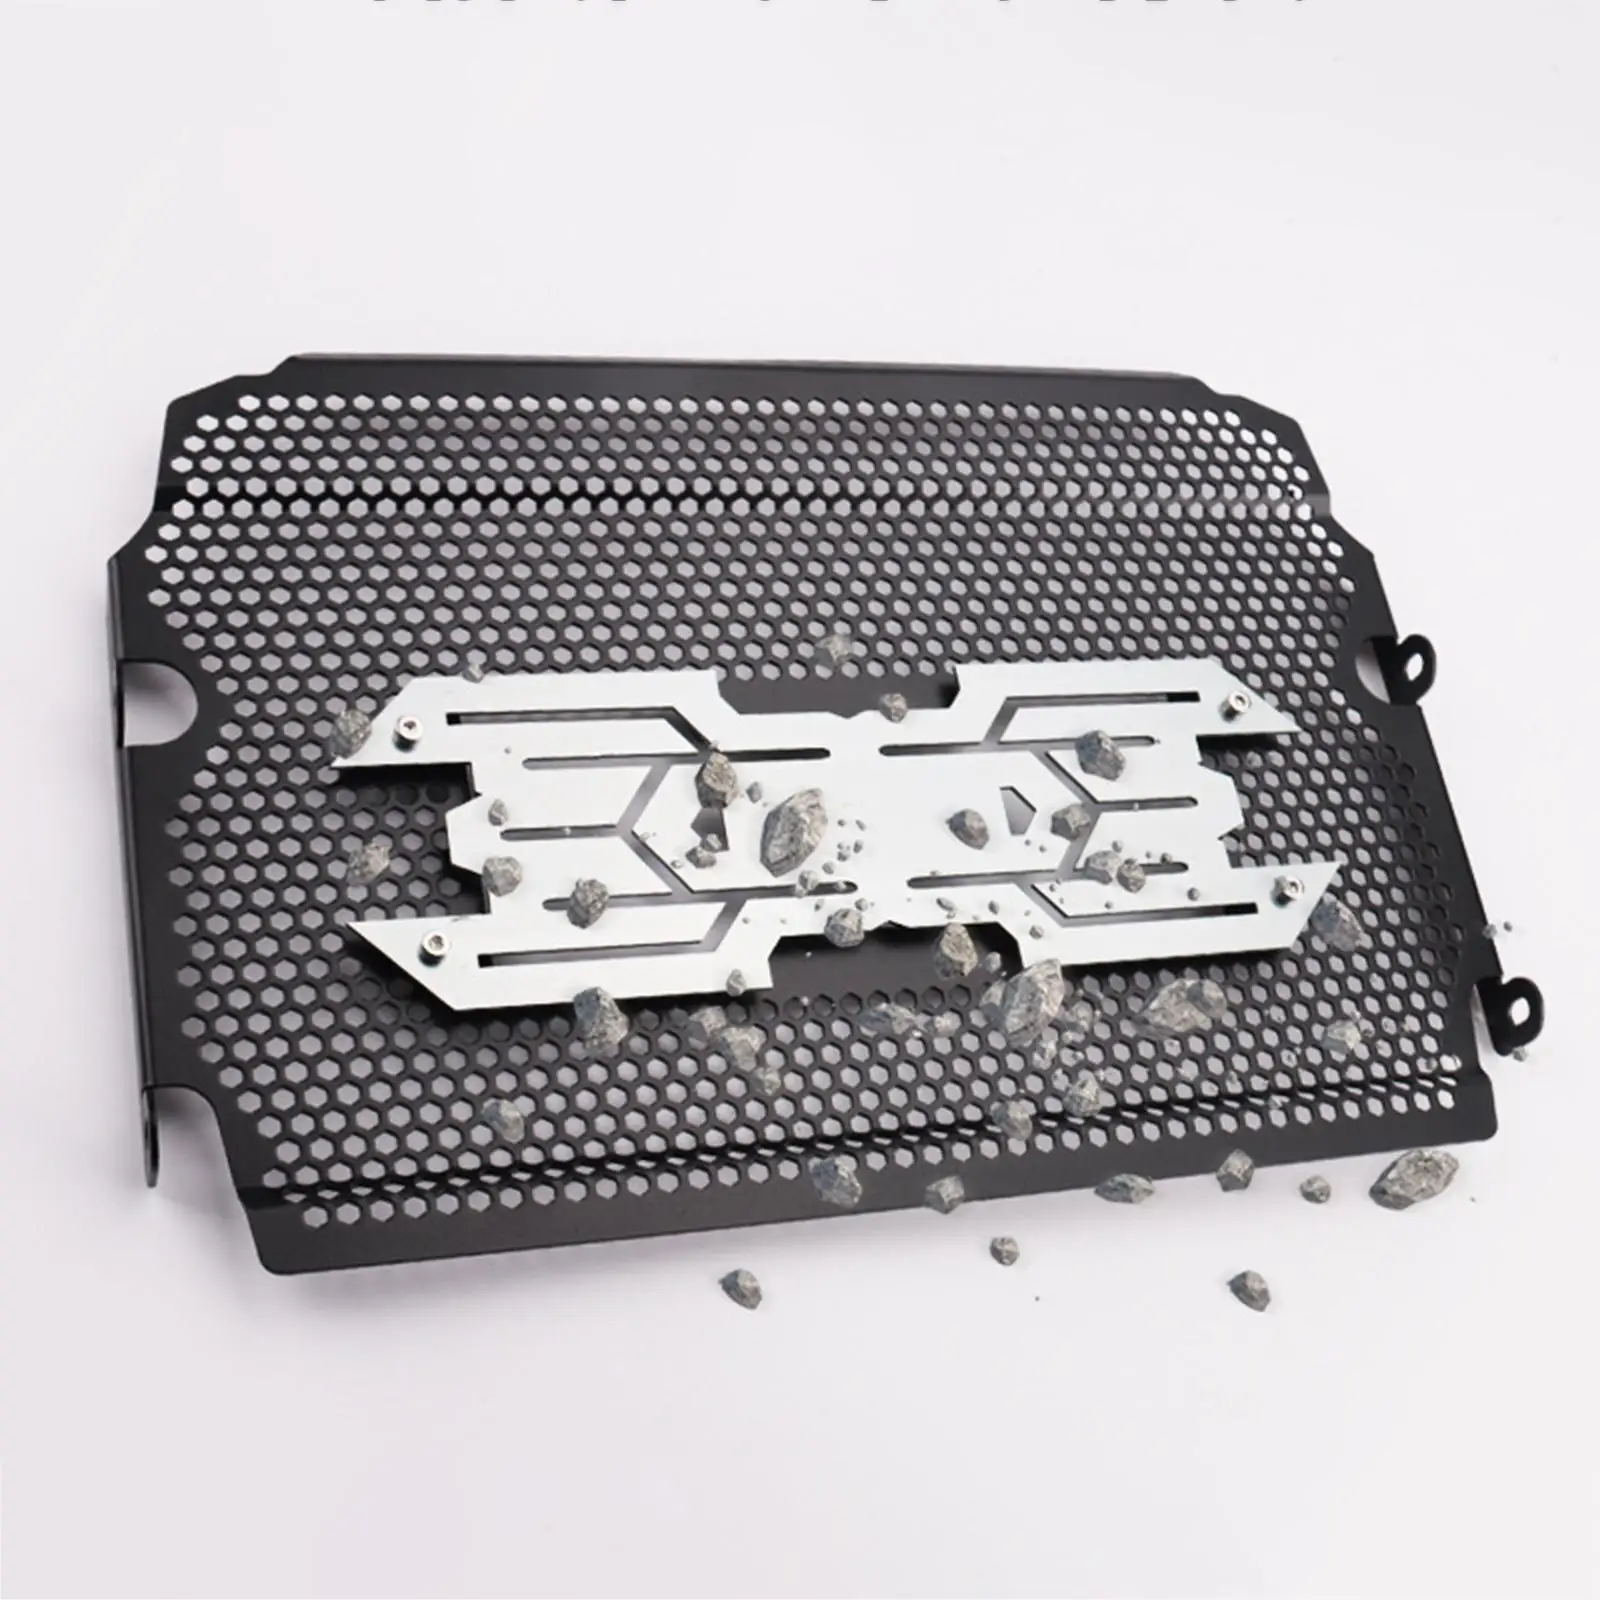 Motorcycle Radiator Grille Guard Aluminum Alloy Black for Yamaha Yzf R7